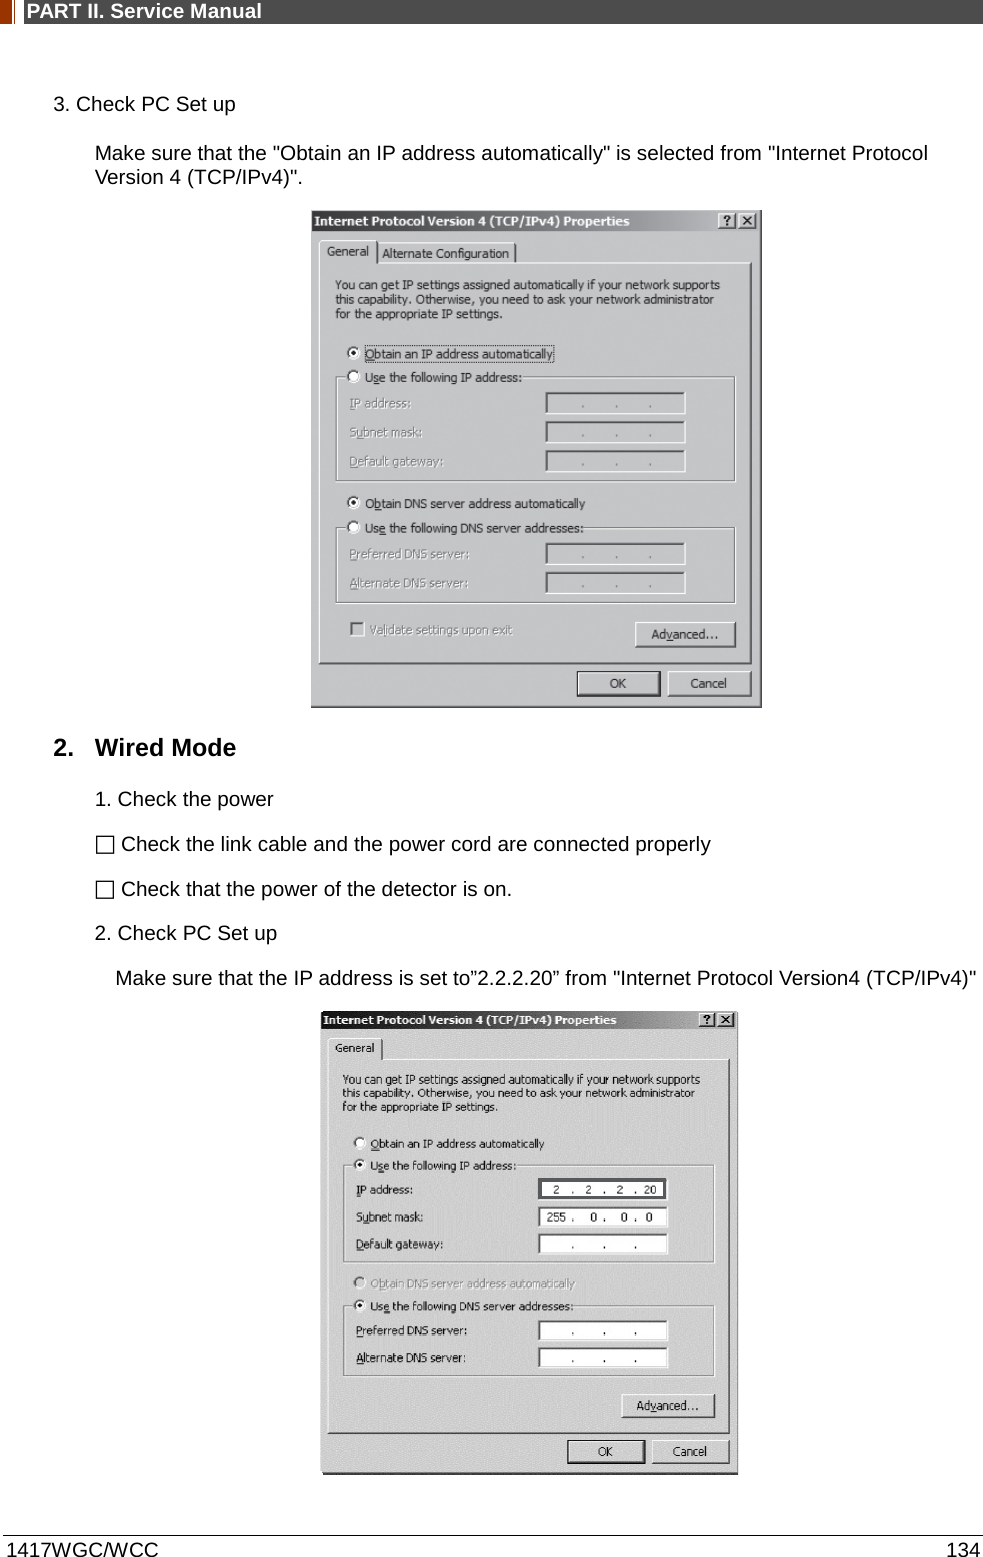 PART II. Service Manual  1417WGC/WCC 134 3. Check PC Set up Make sure that the &quot;Obtain an IP address automatically&quot; is selected from &quot;Internet Protocol Version 4 (TCP/IPv4)&quot;.  2. Wired Mode 1. Check the power  Check the link cable and the power cord are connected properly  Check that the power of the detector is on. 2. Check PC Set up Make sure that the IP address is set to”2.2.2.20” from &quot;Internet Protocol Version4 (TCP/IPv4)&quot;  